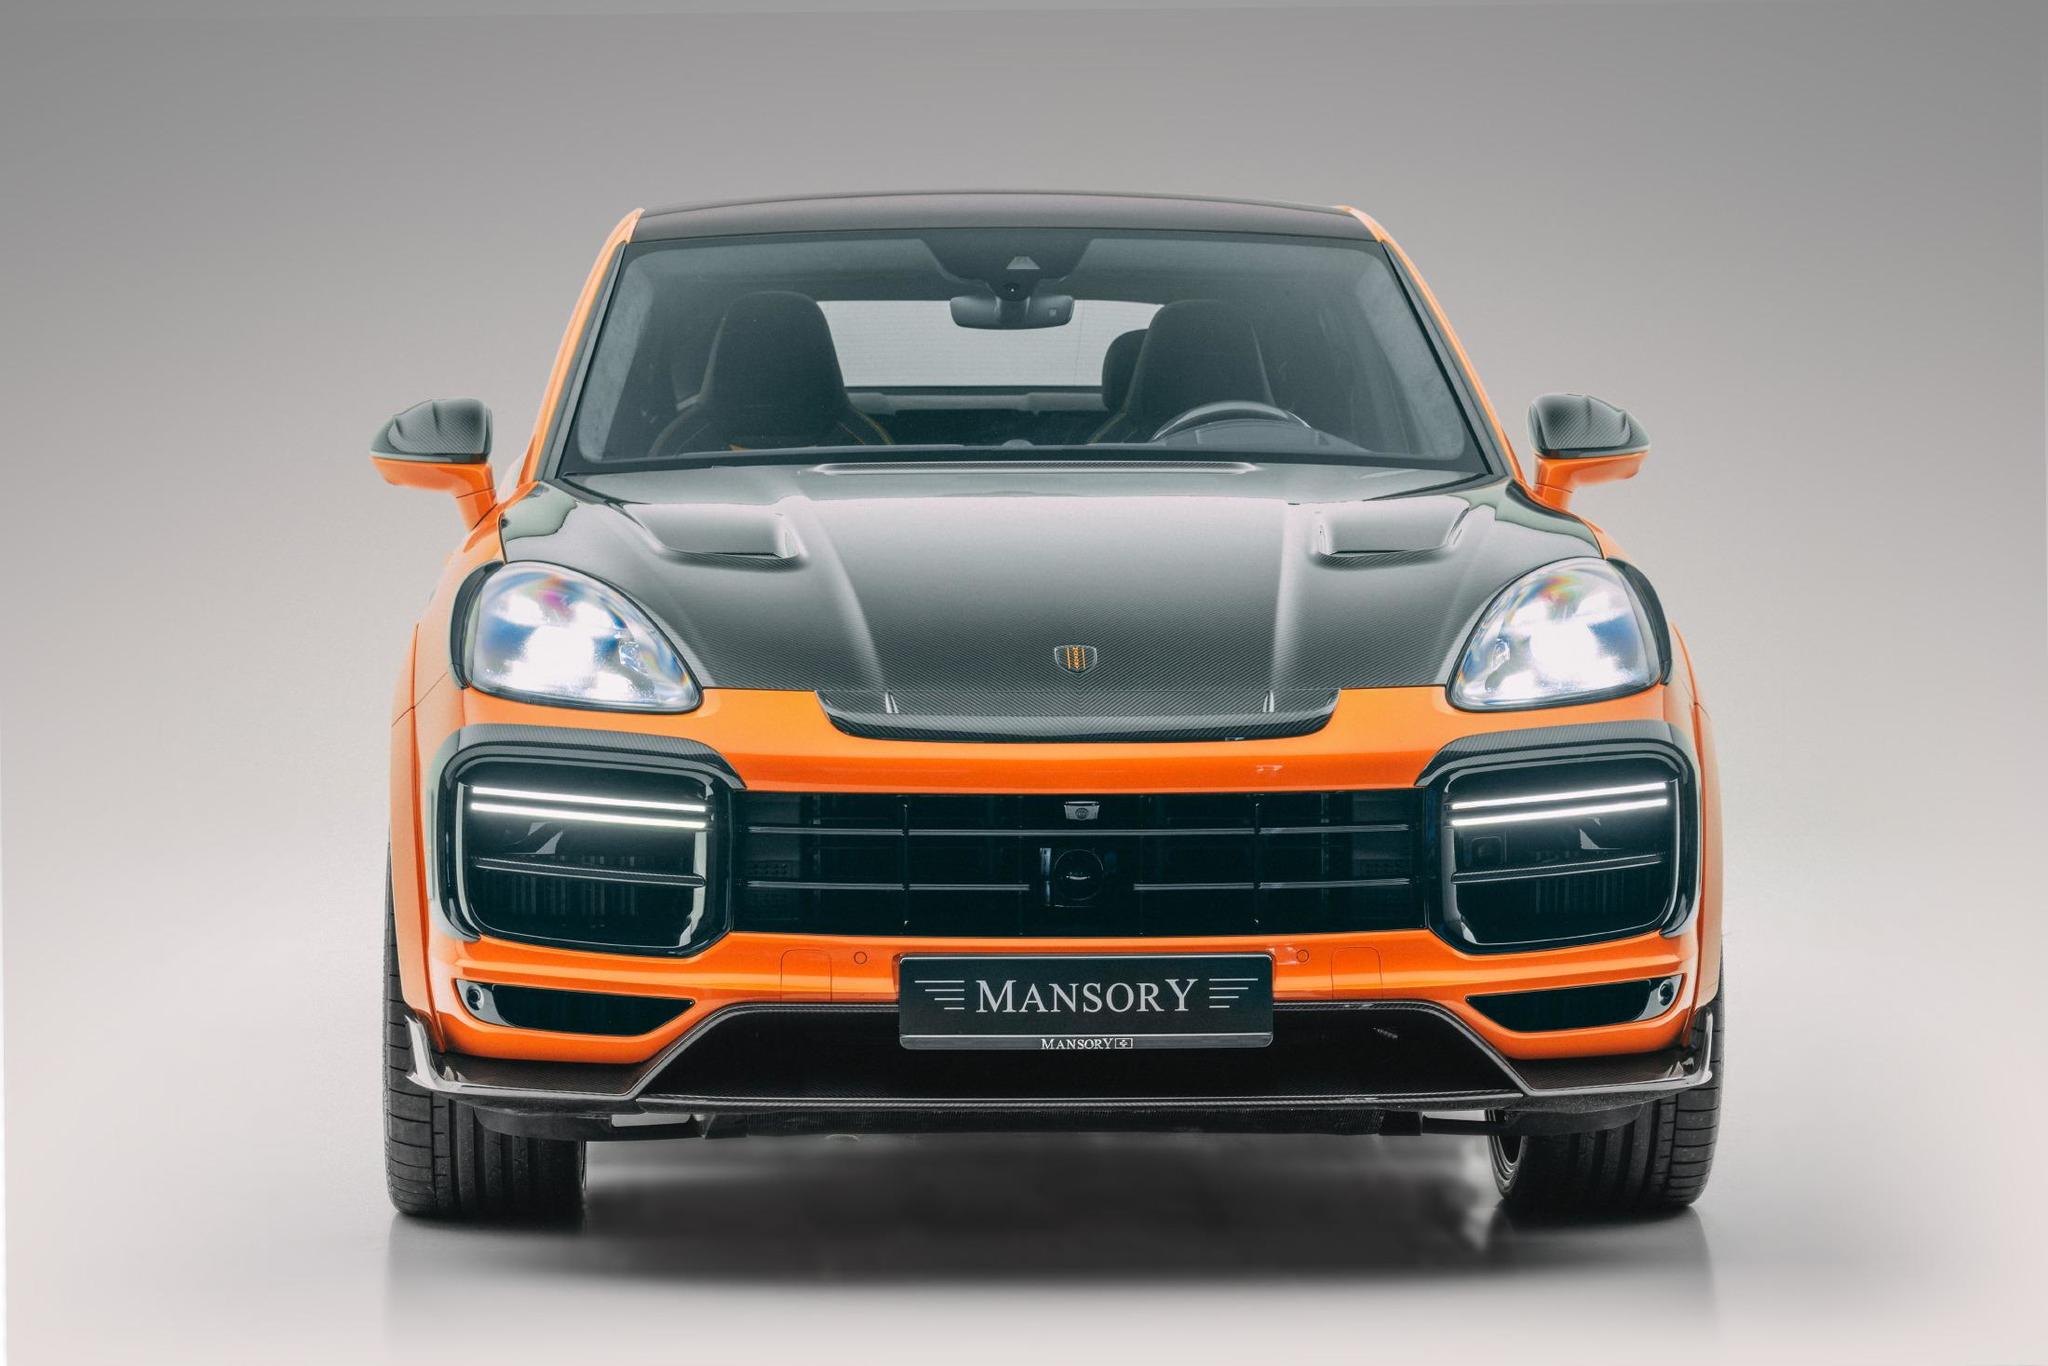 Mansory body kit for Porsche Cayenne coupe new style